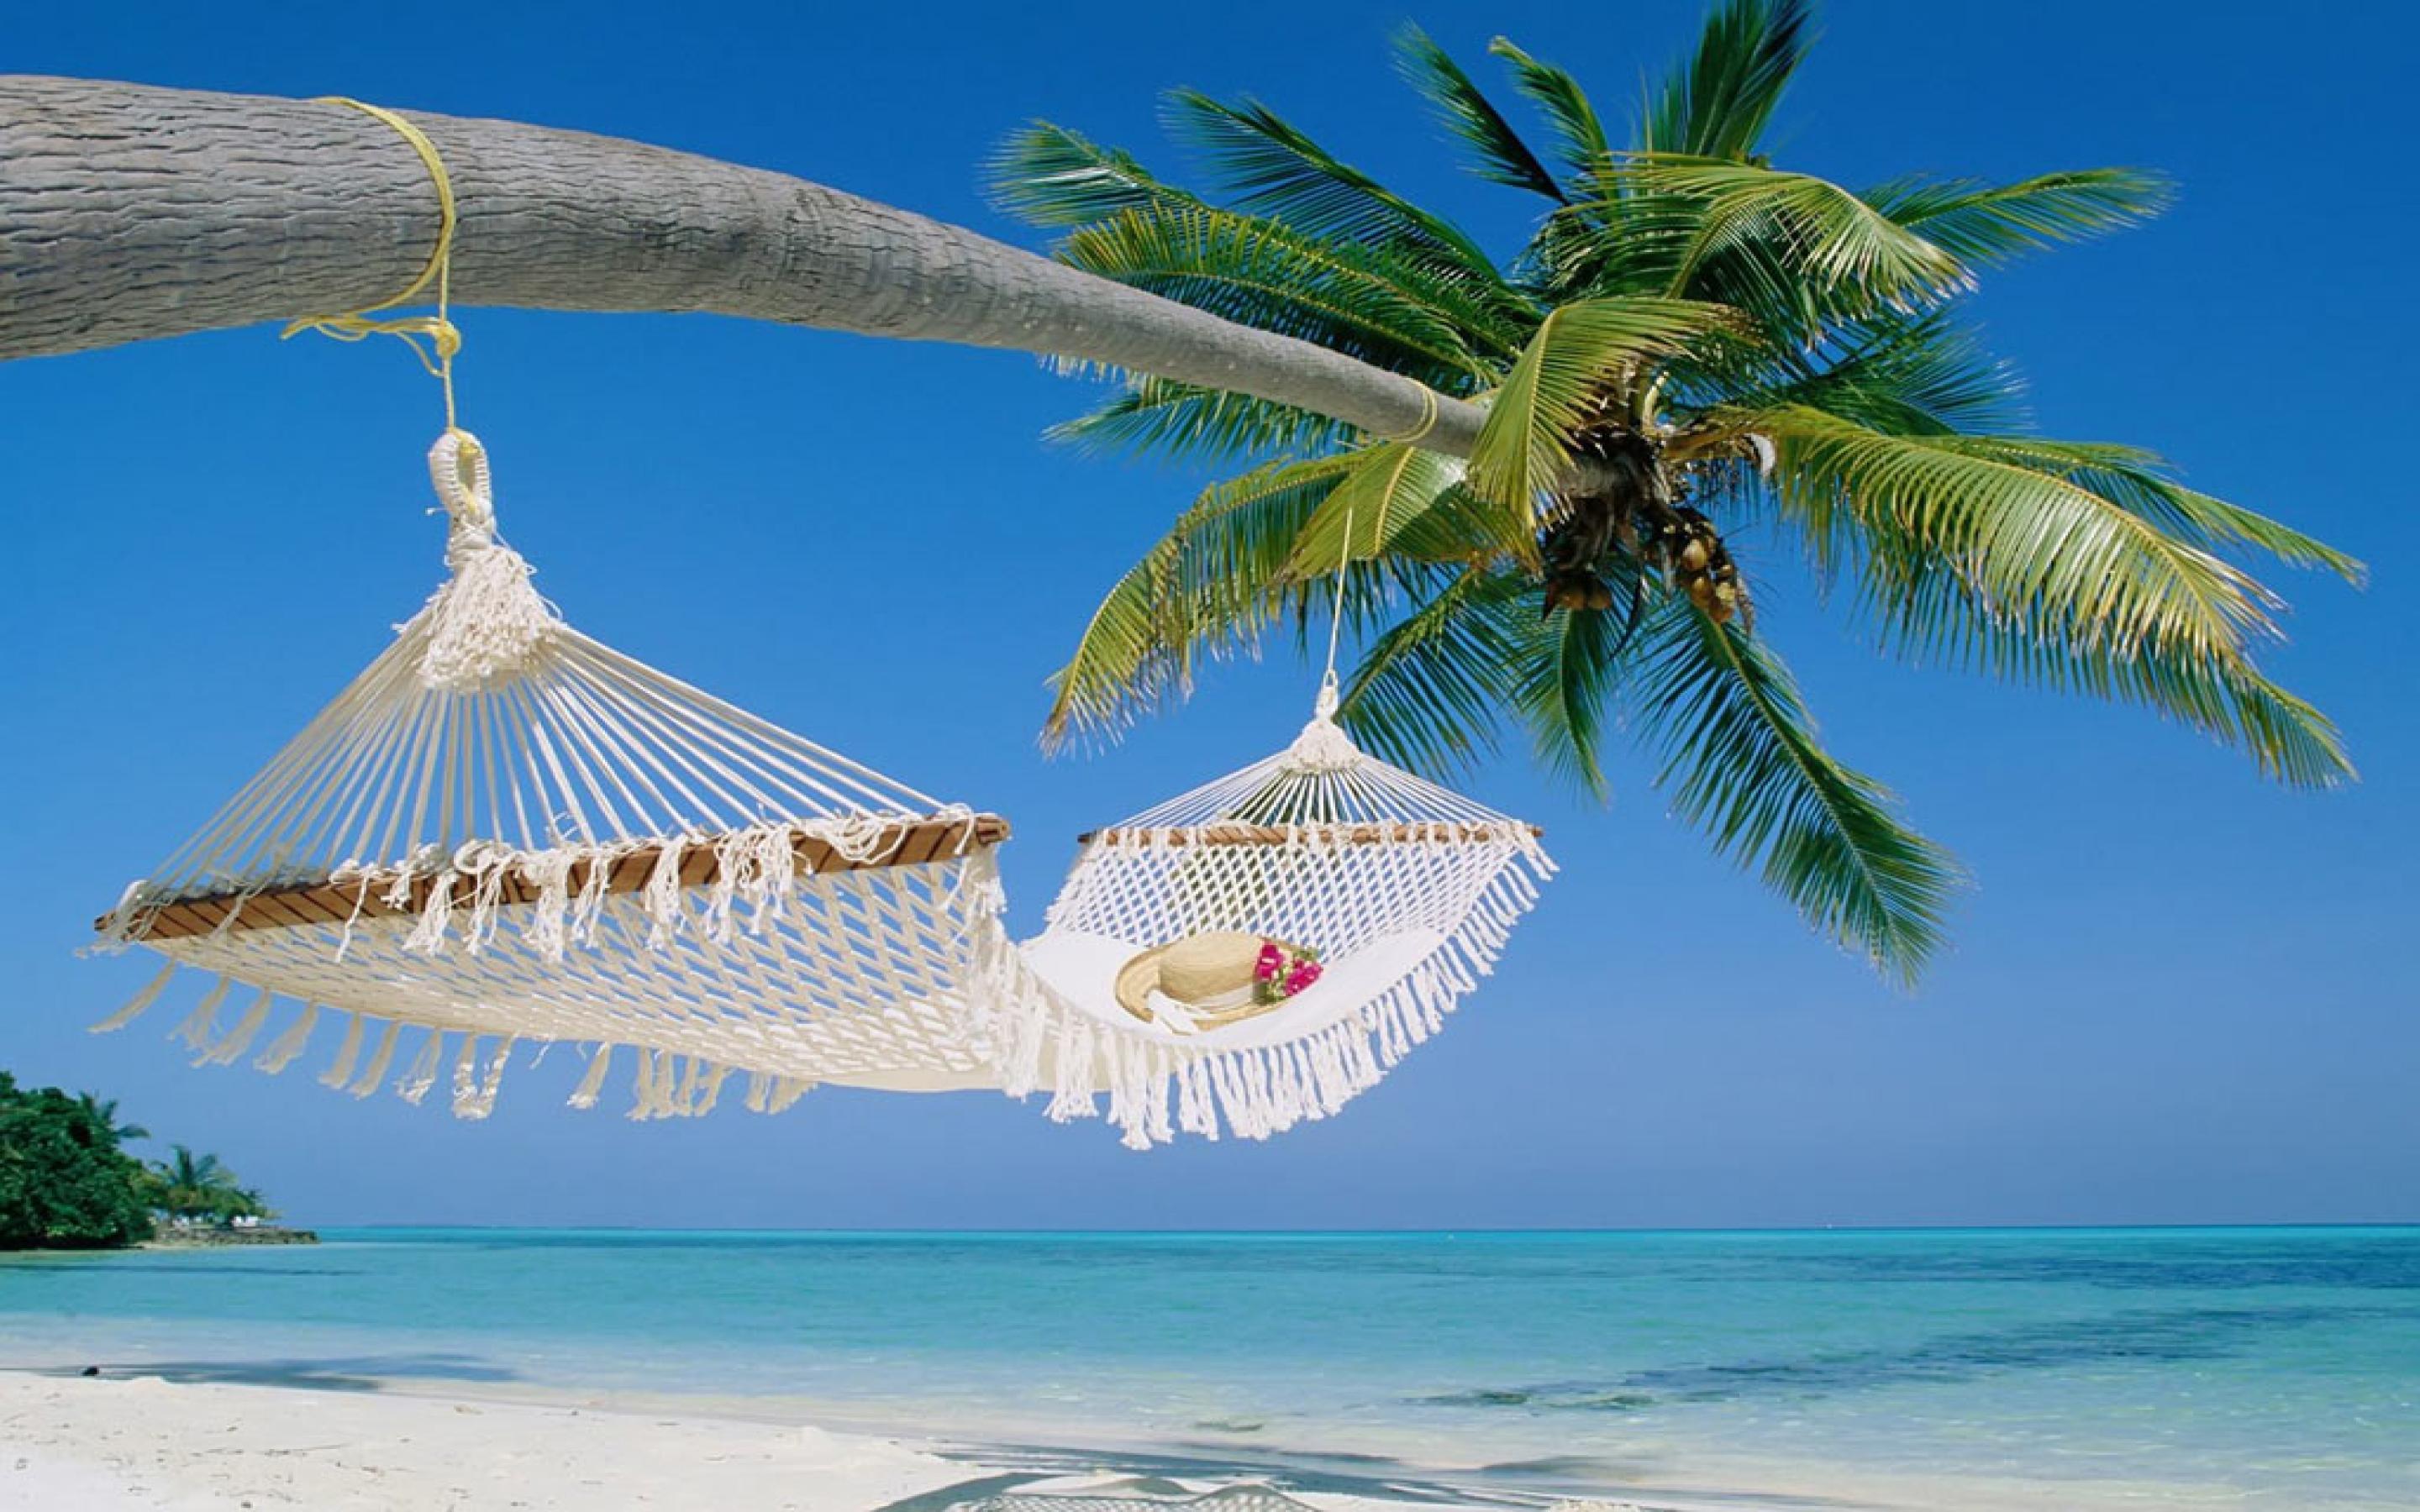 Maldives Tropical Beach Palm Tree with Hammock Wallpaper in High